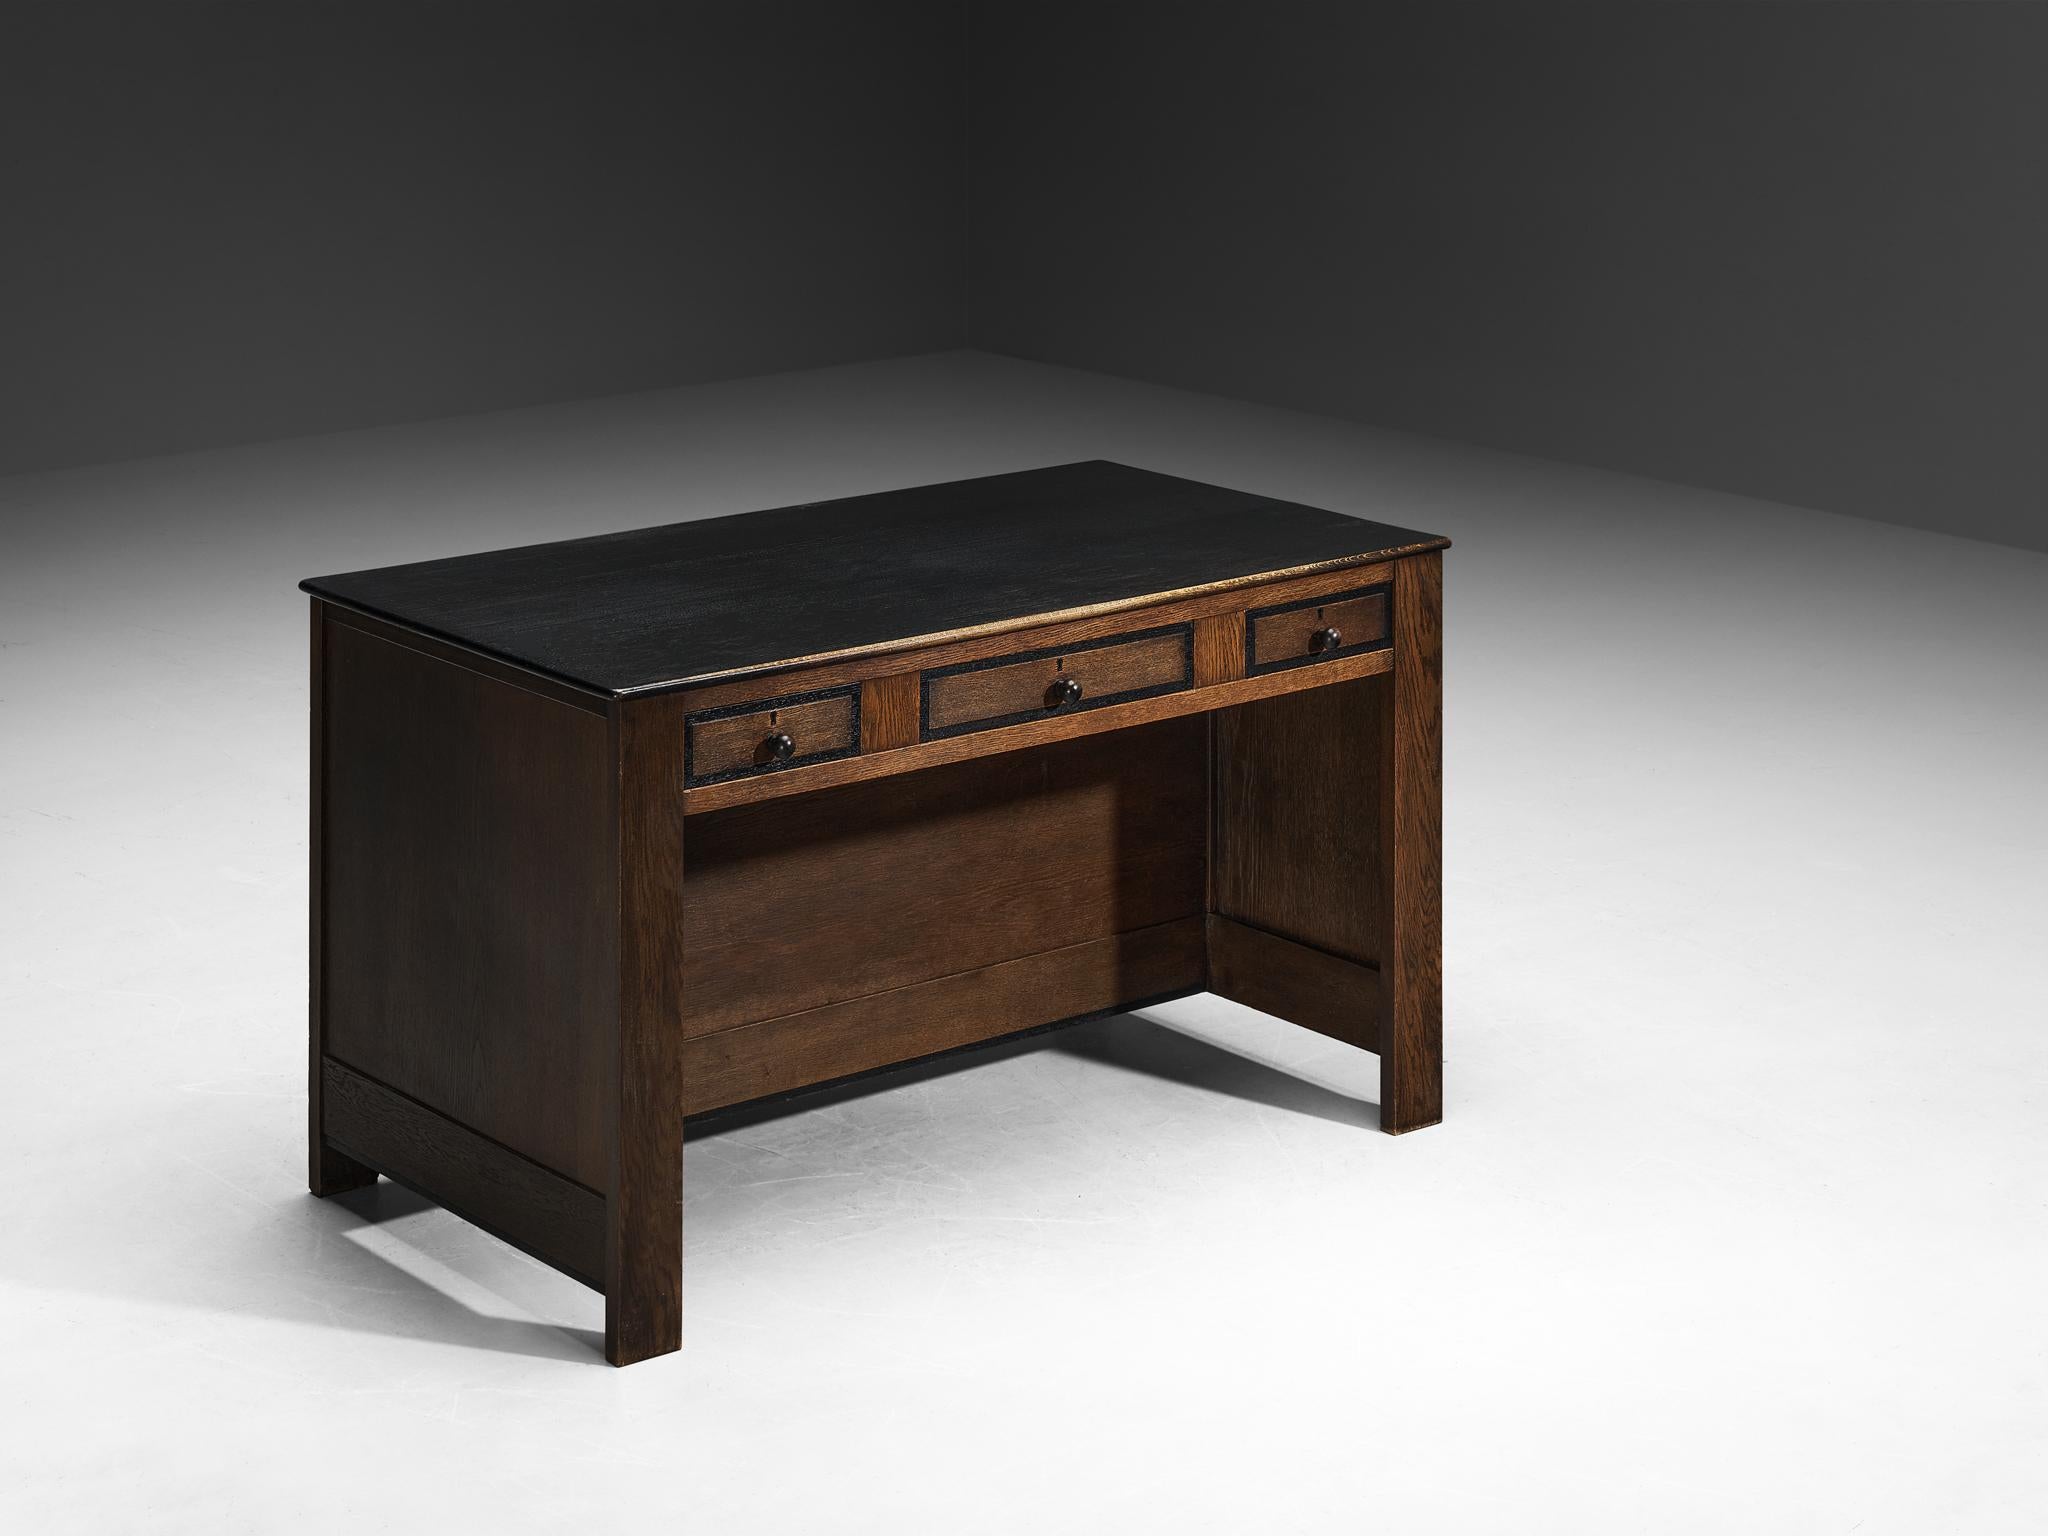 LOV Oosterbeek desk, oak, wood, The Netherlands, 1920s

This impeccably designed desk is characterized by a sleek rectangular silhouette, accentuated by bold vertical and horizontal lines. Crafted from solid oak, it showcases a captivating pattern